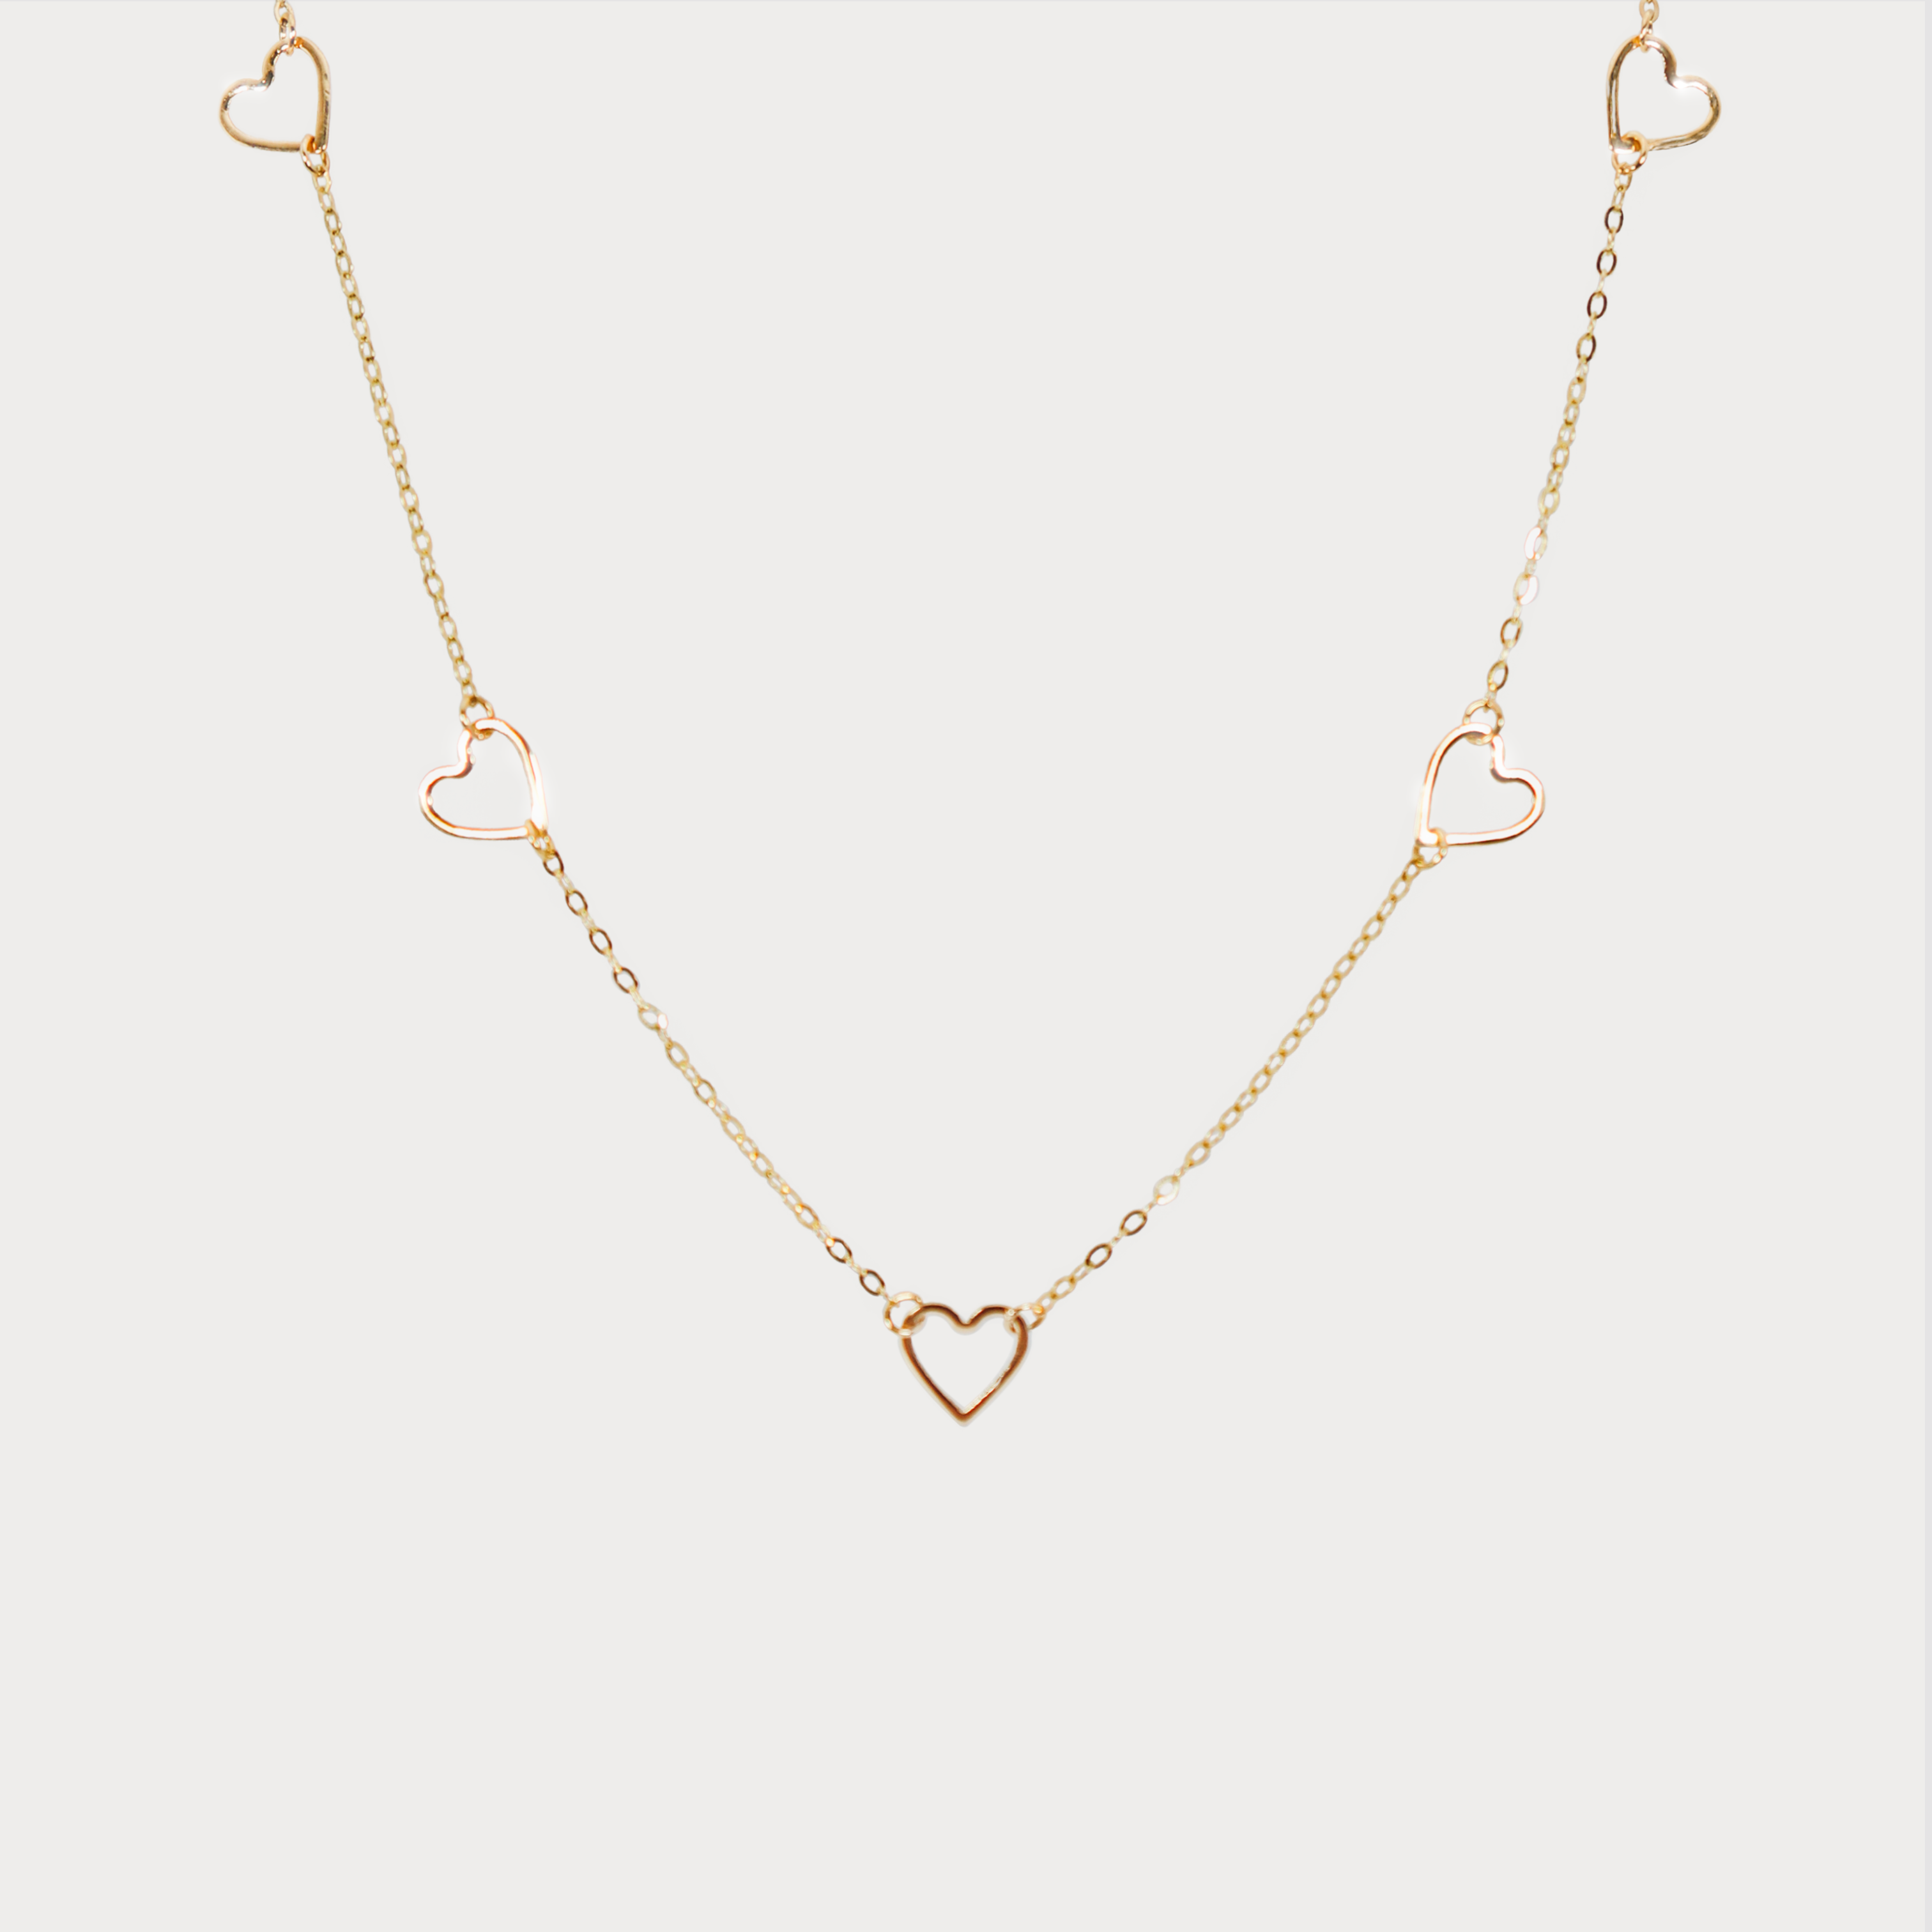 14K Solid Gold 9 Love Heart Chain Necklace. New luxury of online jewelry stores. Shop all fine jewelry.